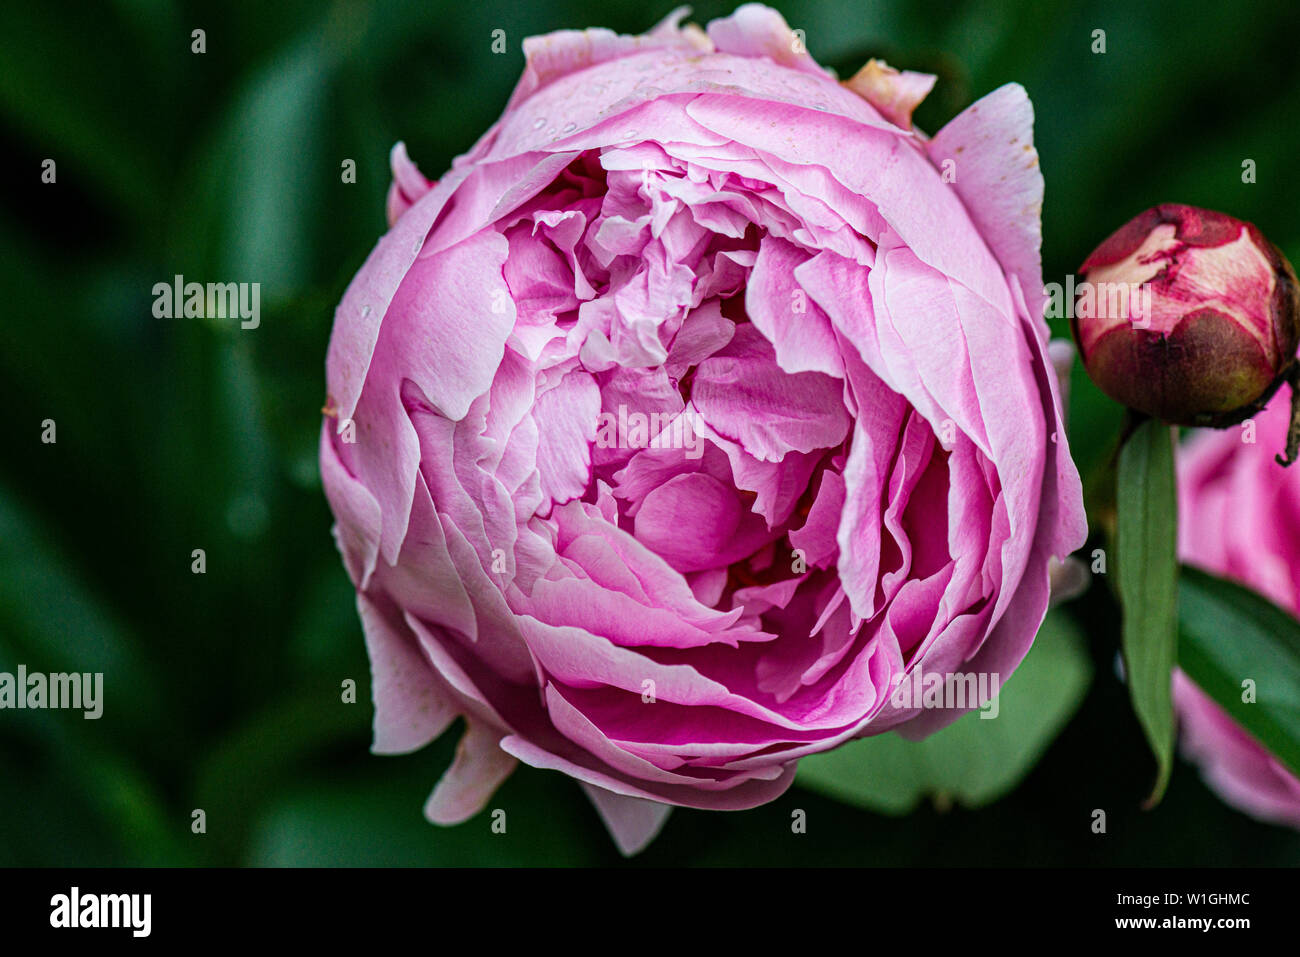 A pink rose Stock Photo